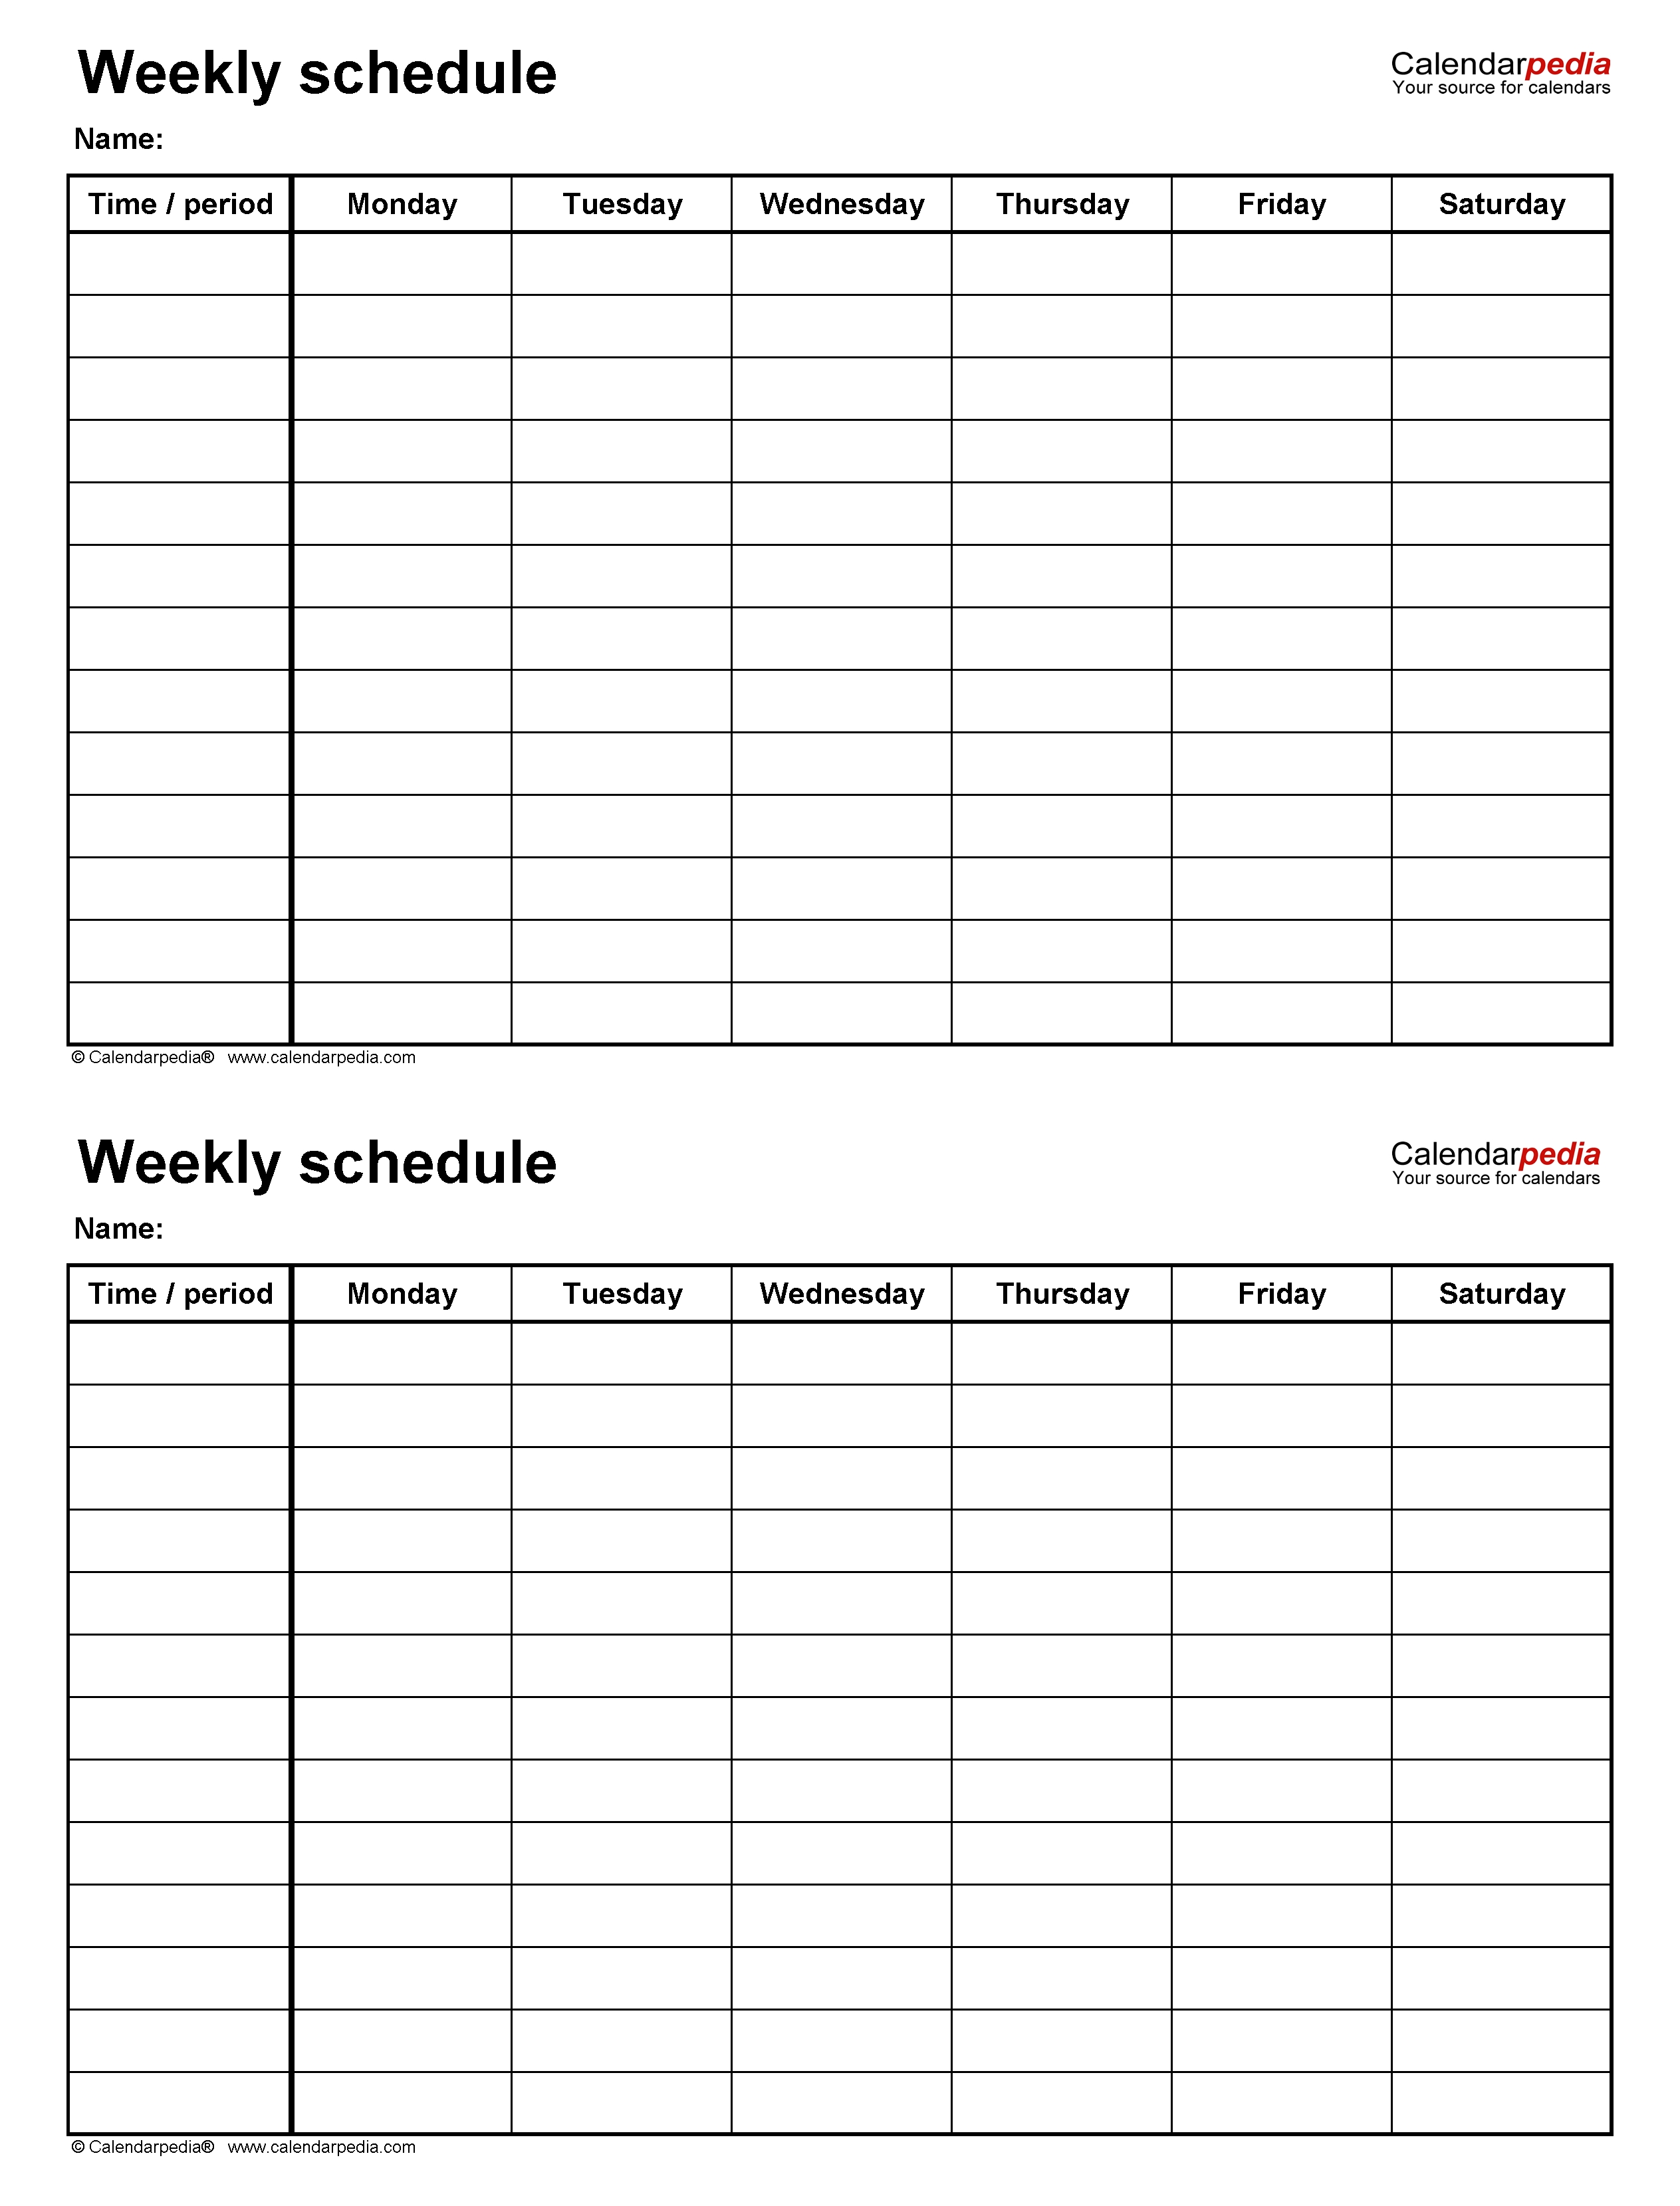 Free Weekly Schedule Templates For Excel - 18 Templates